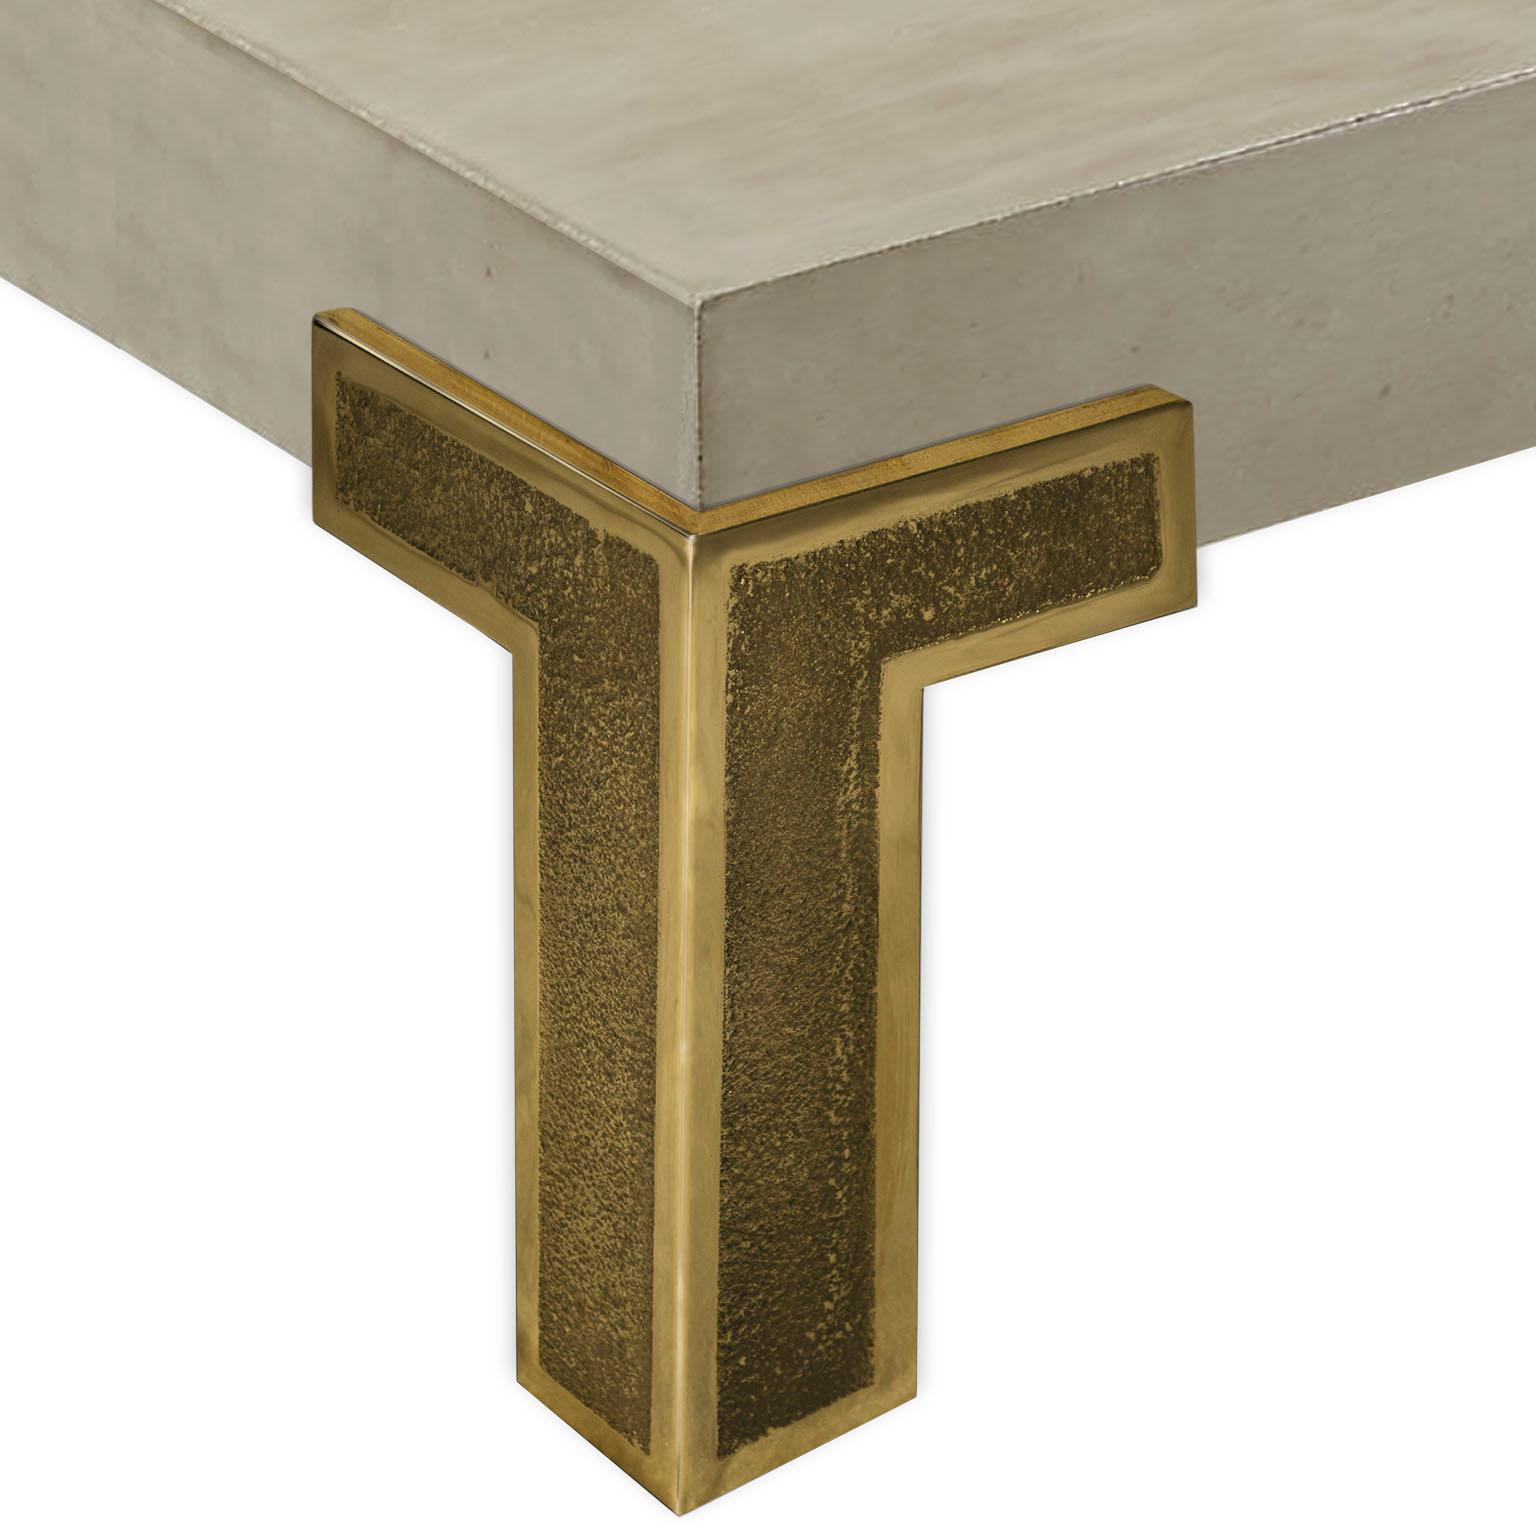 Modern Coffee Table Grey Scagliola art top extra smooth finish top Casted Brass Feet